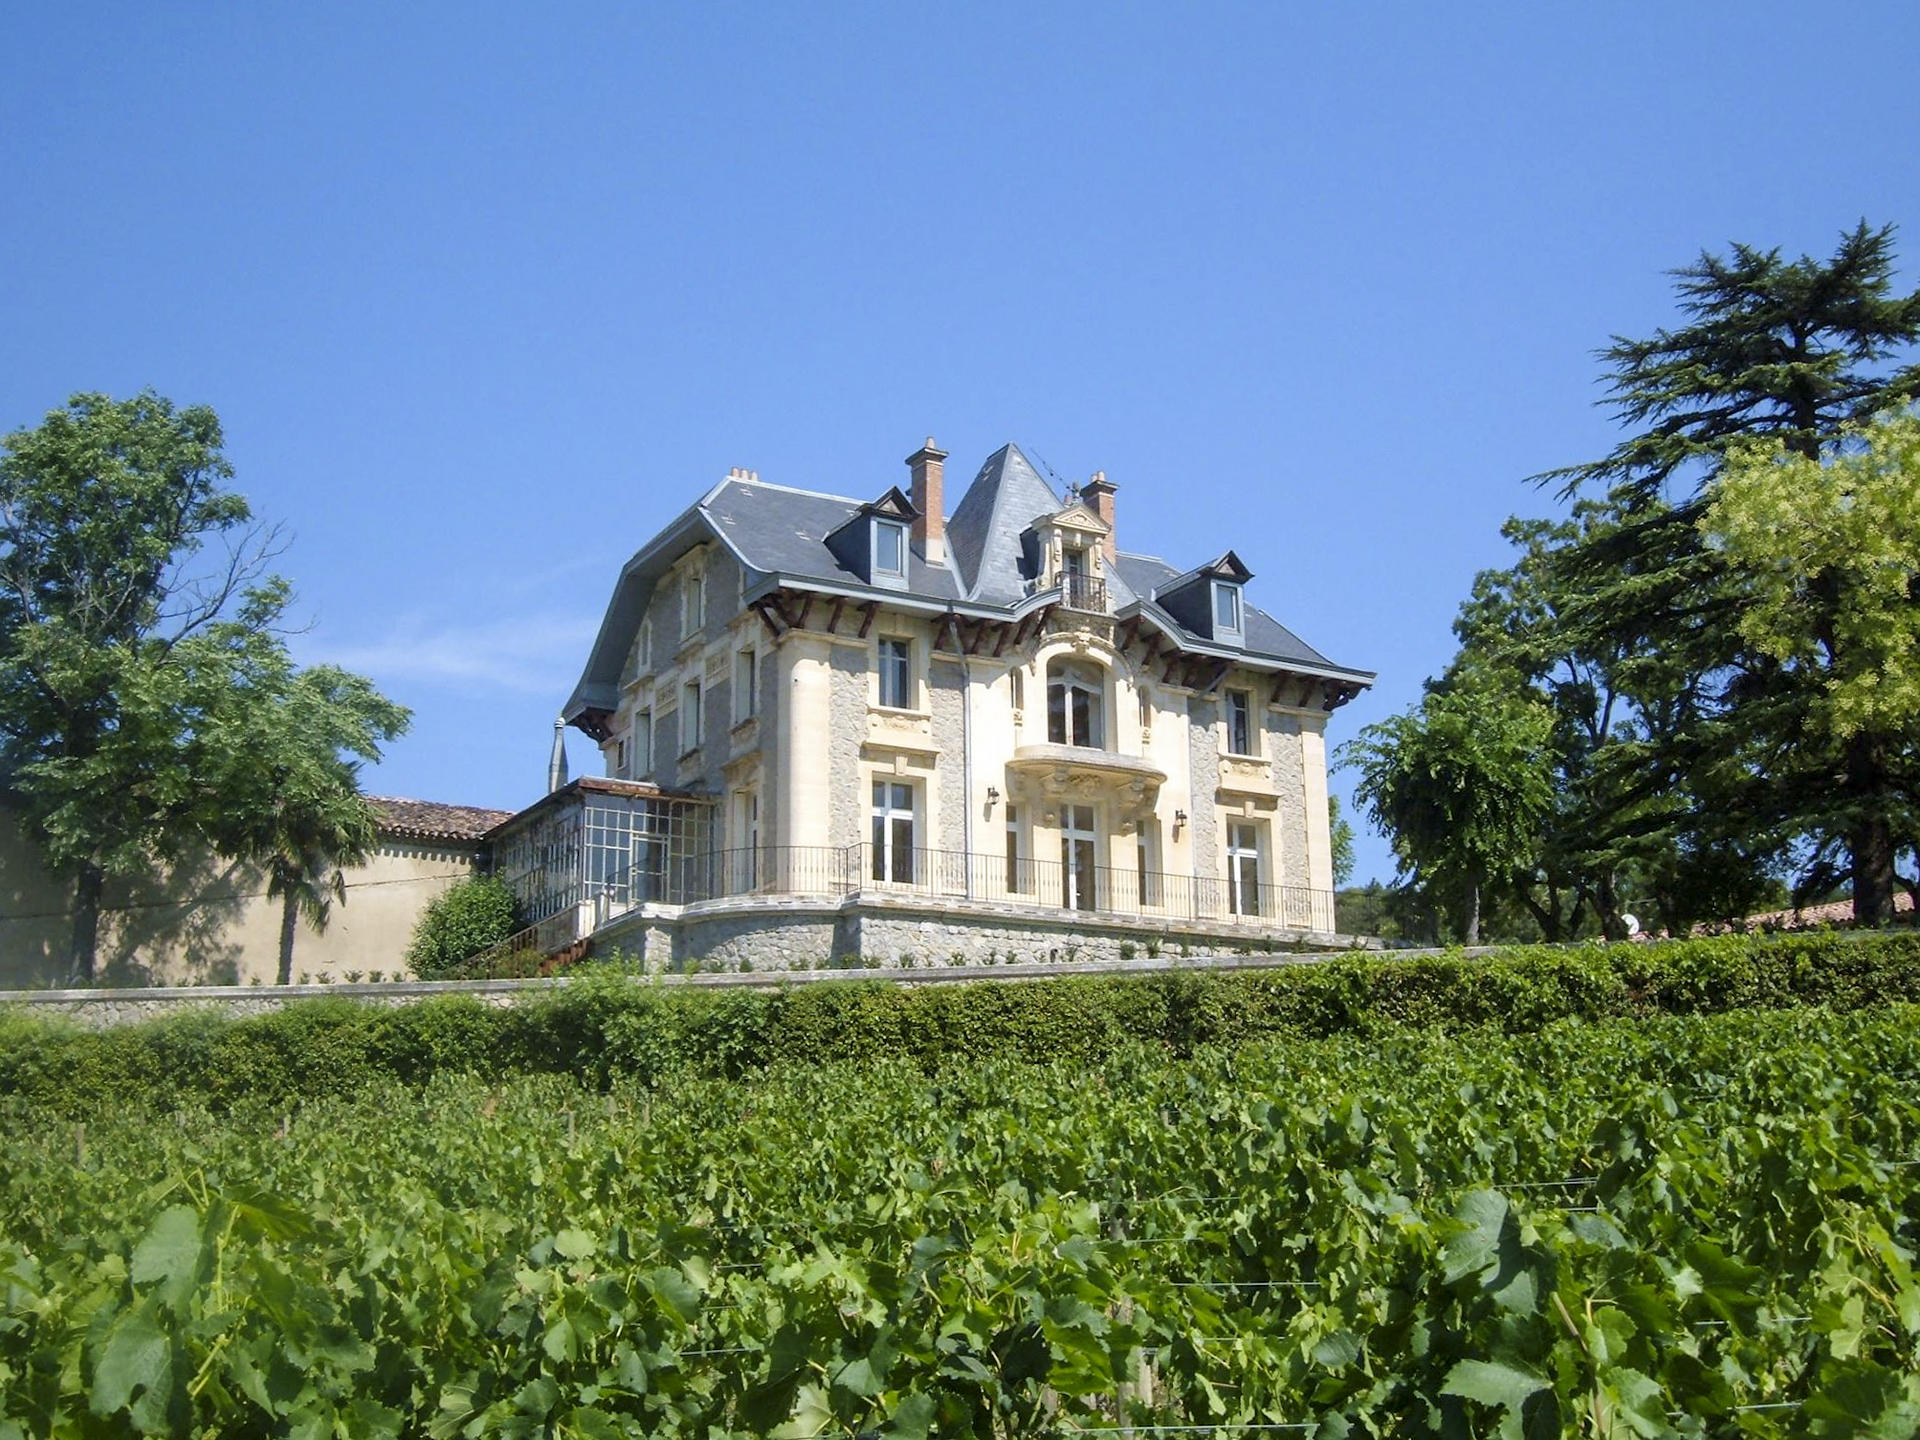 Domaine de Baron'Arques focuses on chardonnay and has some of the best wines in the Limoux appellation.